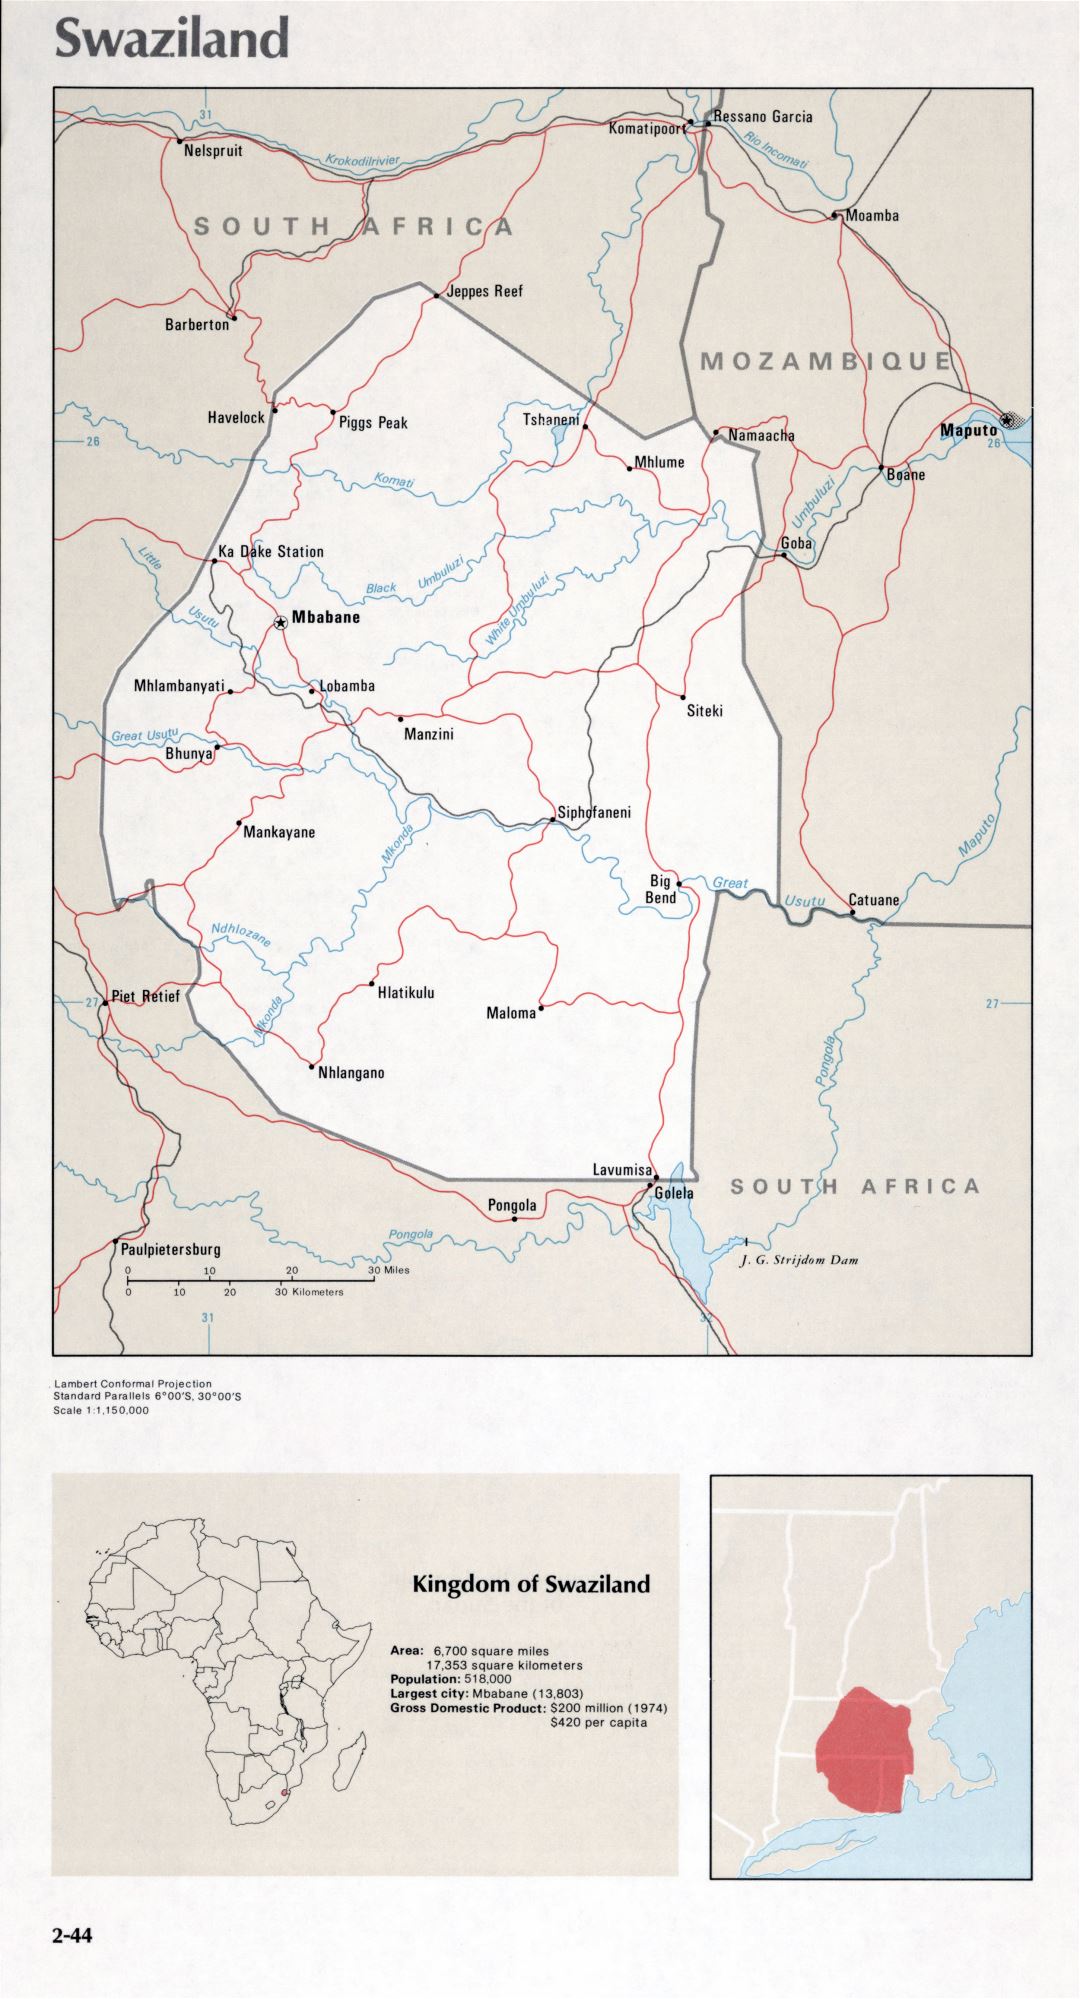 Map of Swaziland (2-44)